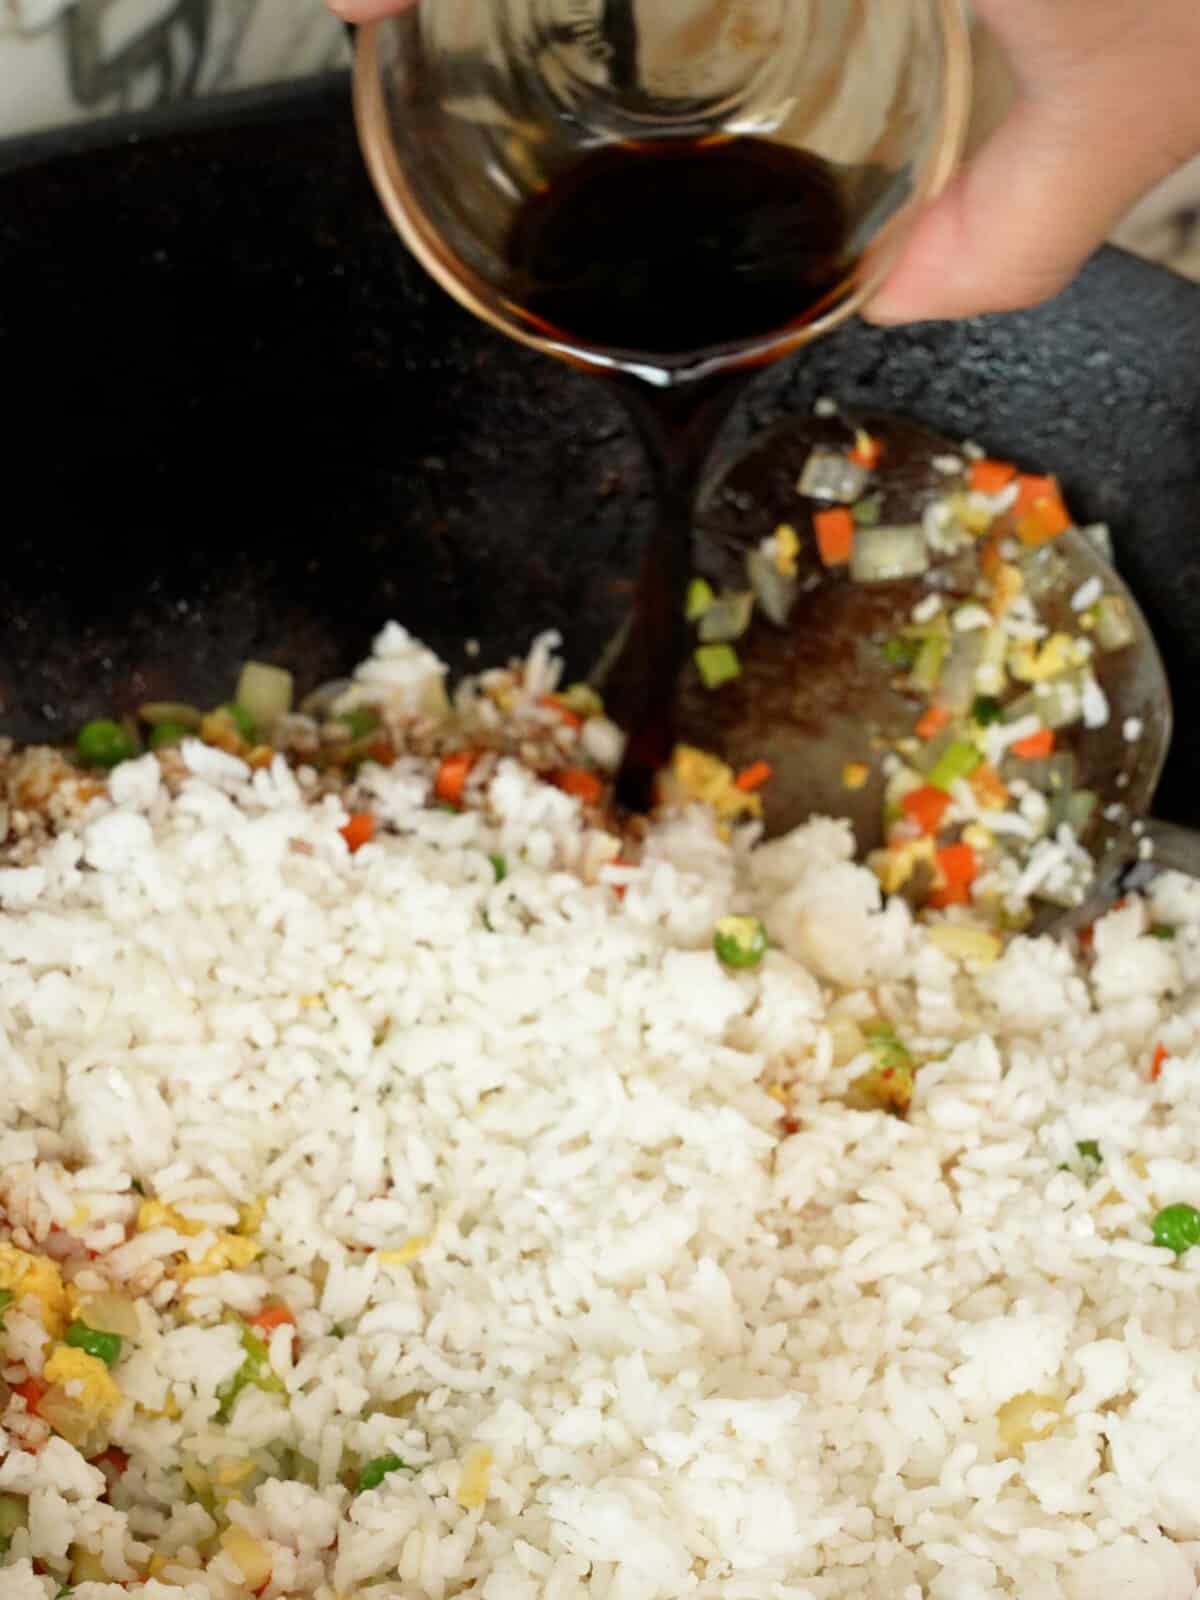 Soy sauce being poured over rice and vegetables in a wok.